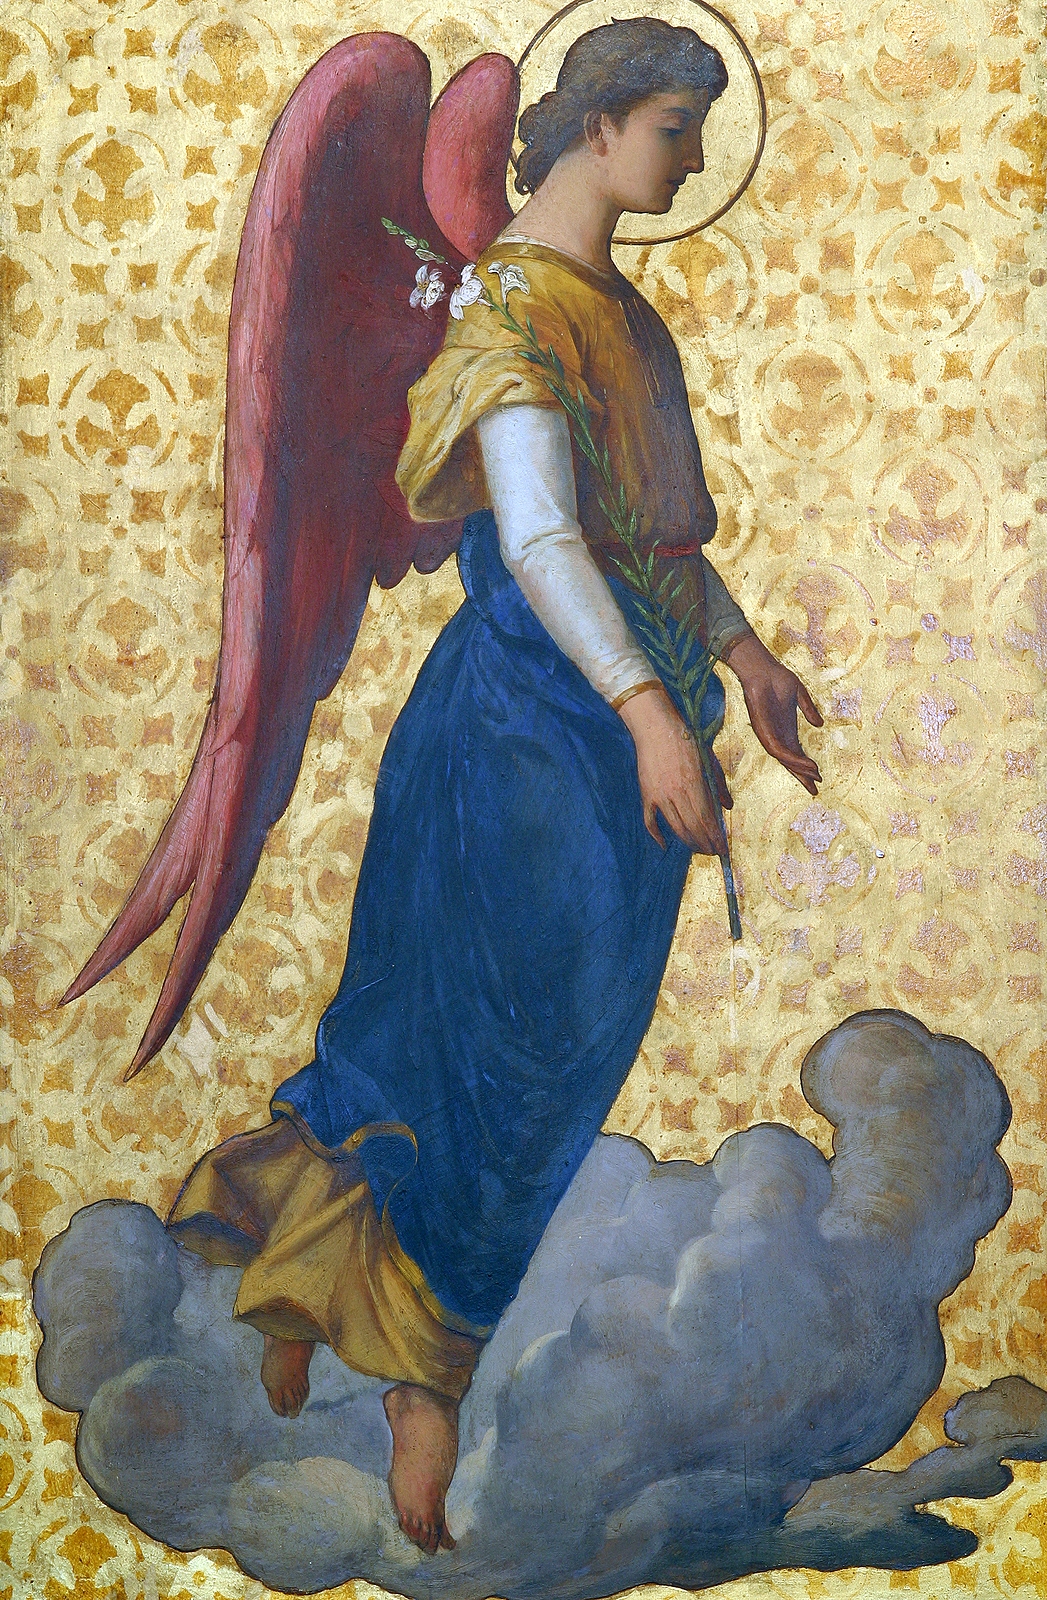 The Archangel Gabriel and His Role in Christianity